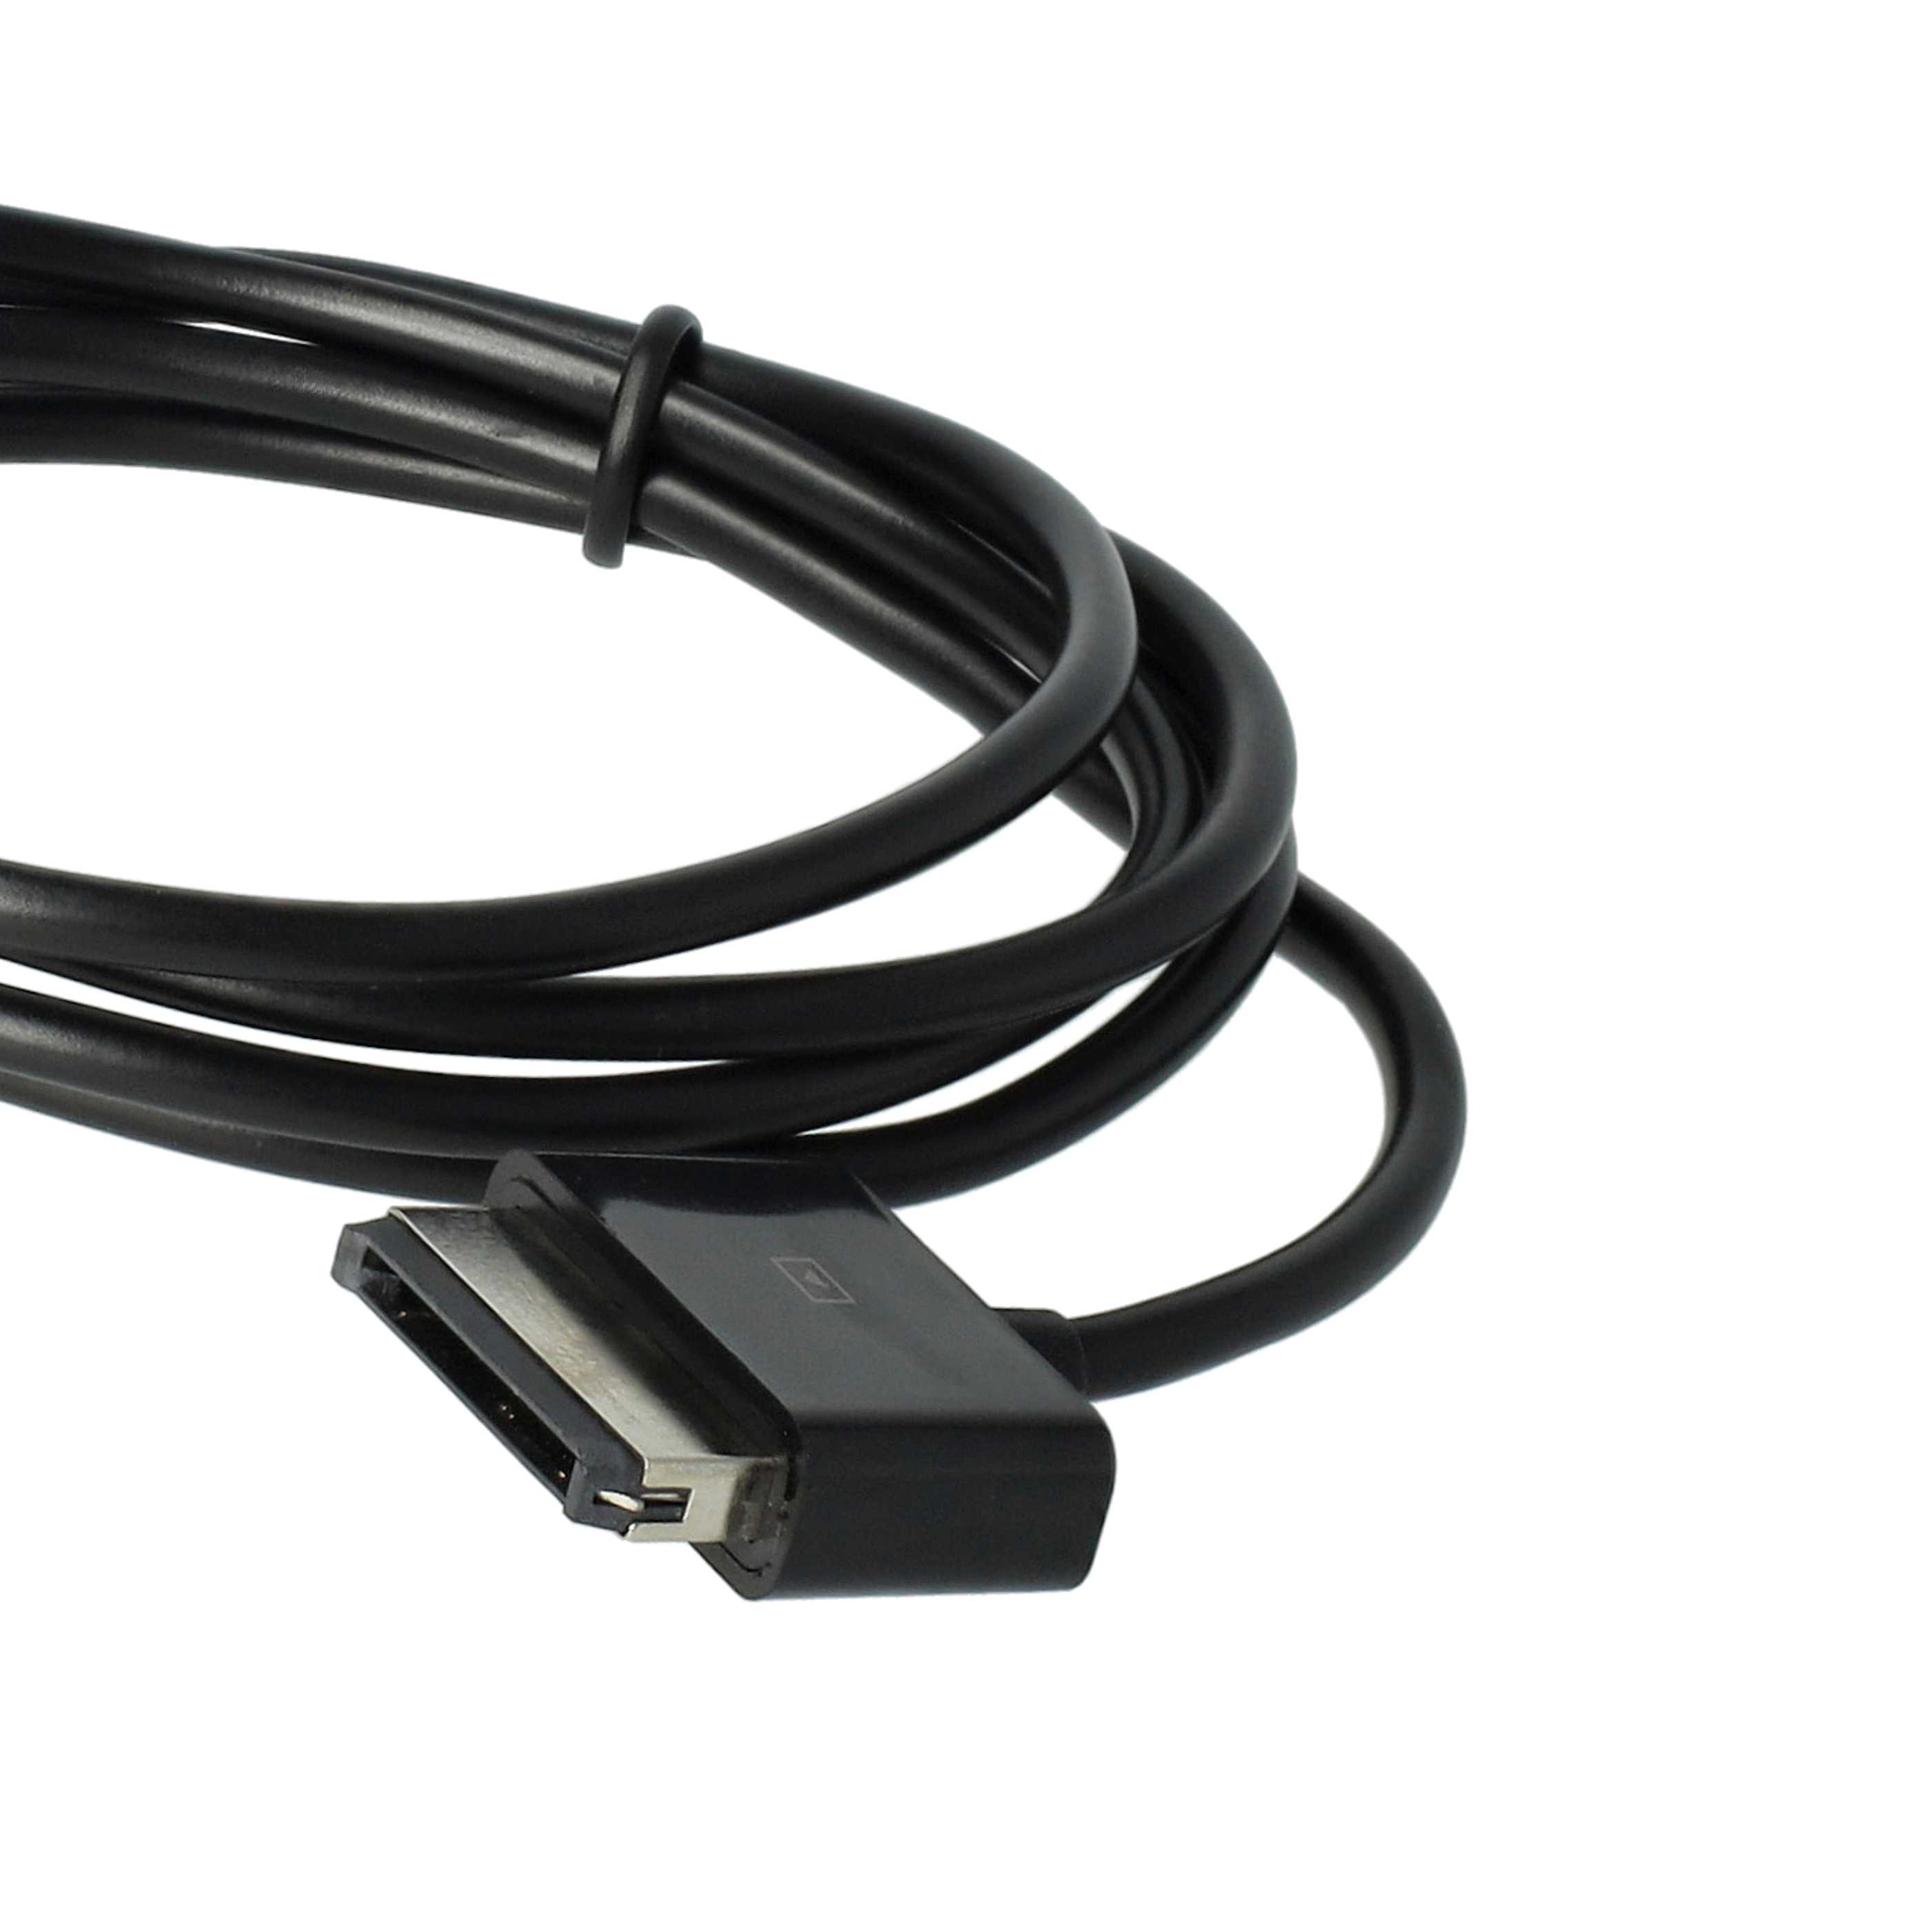 vhbw 1x USB Data Cable Tablet - 2in1 Charging Cable (Standard-USB Type A to Tablet) 100cm Black 